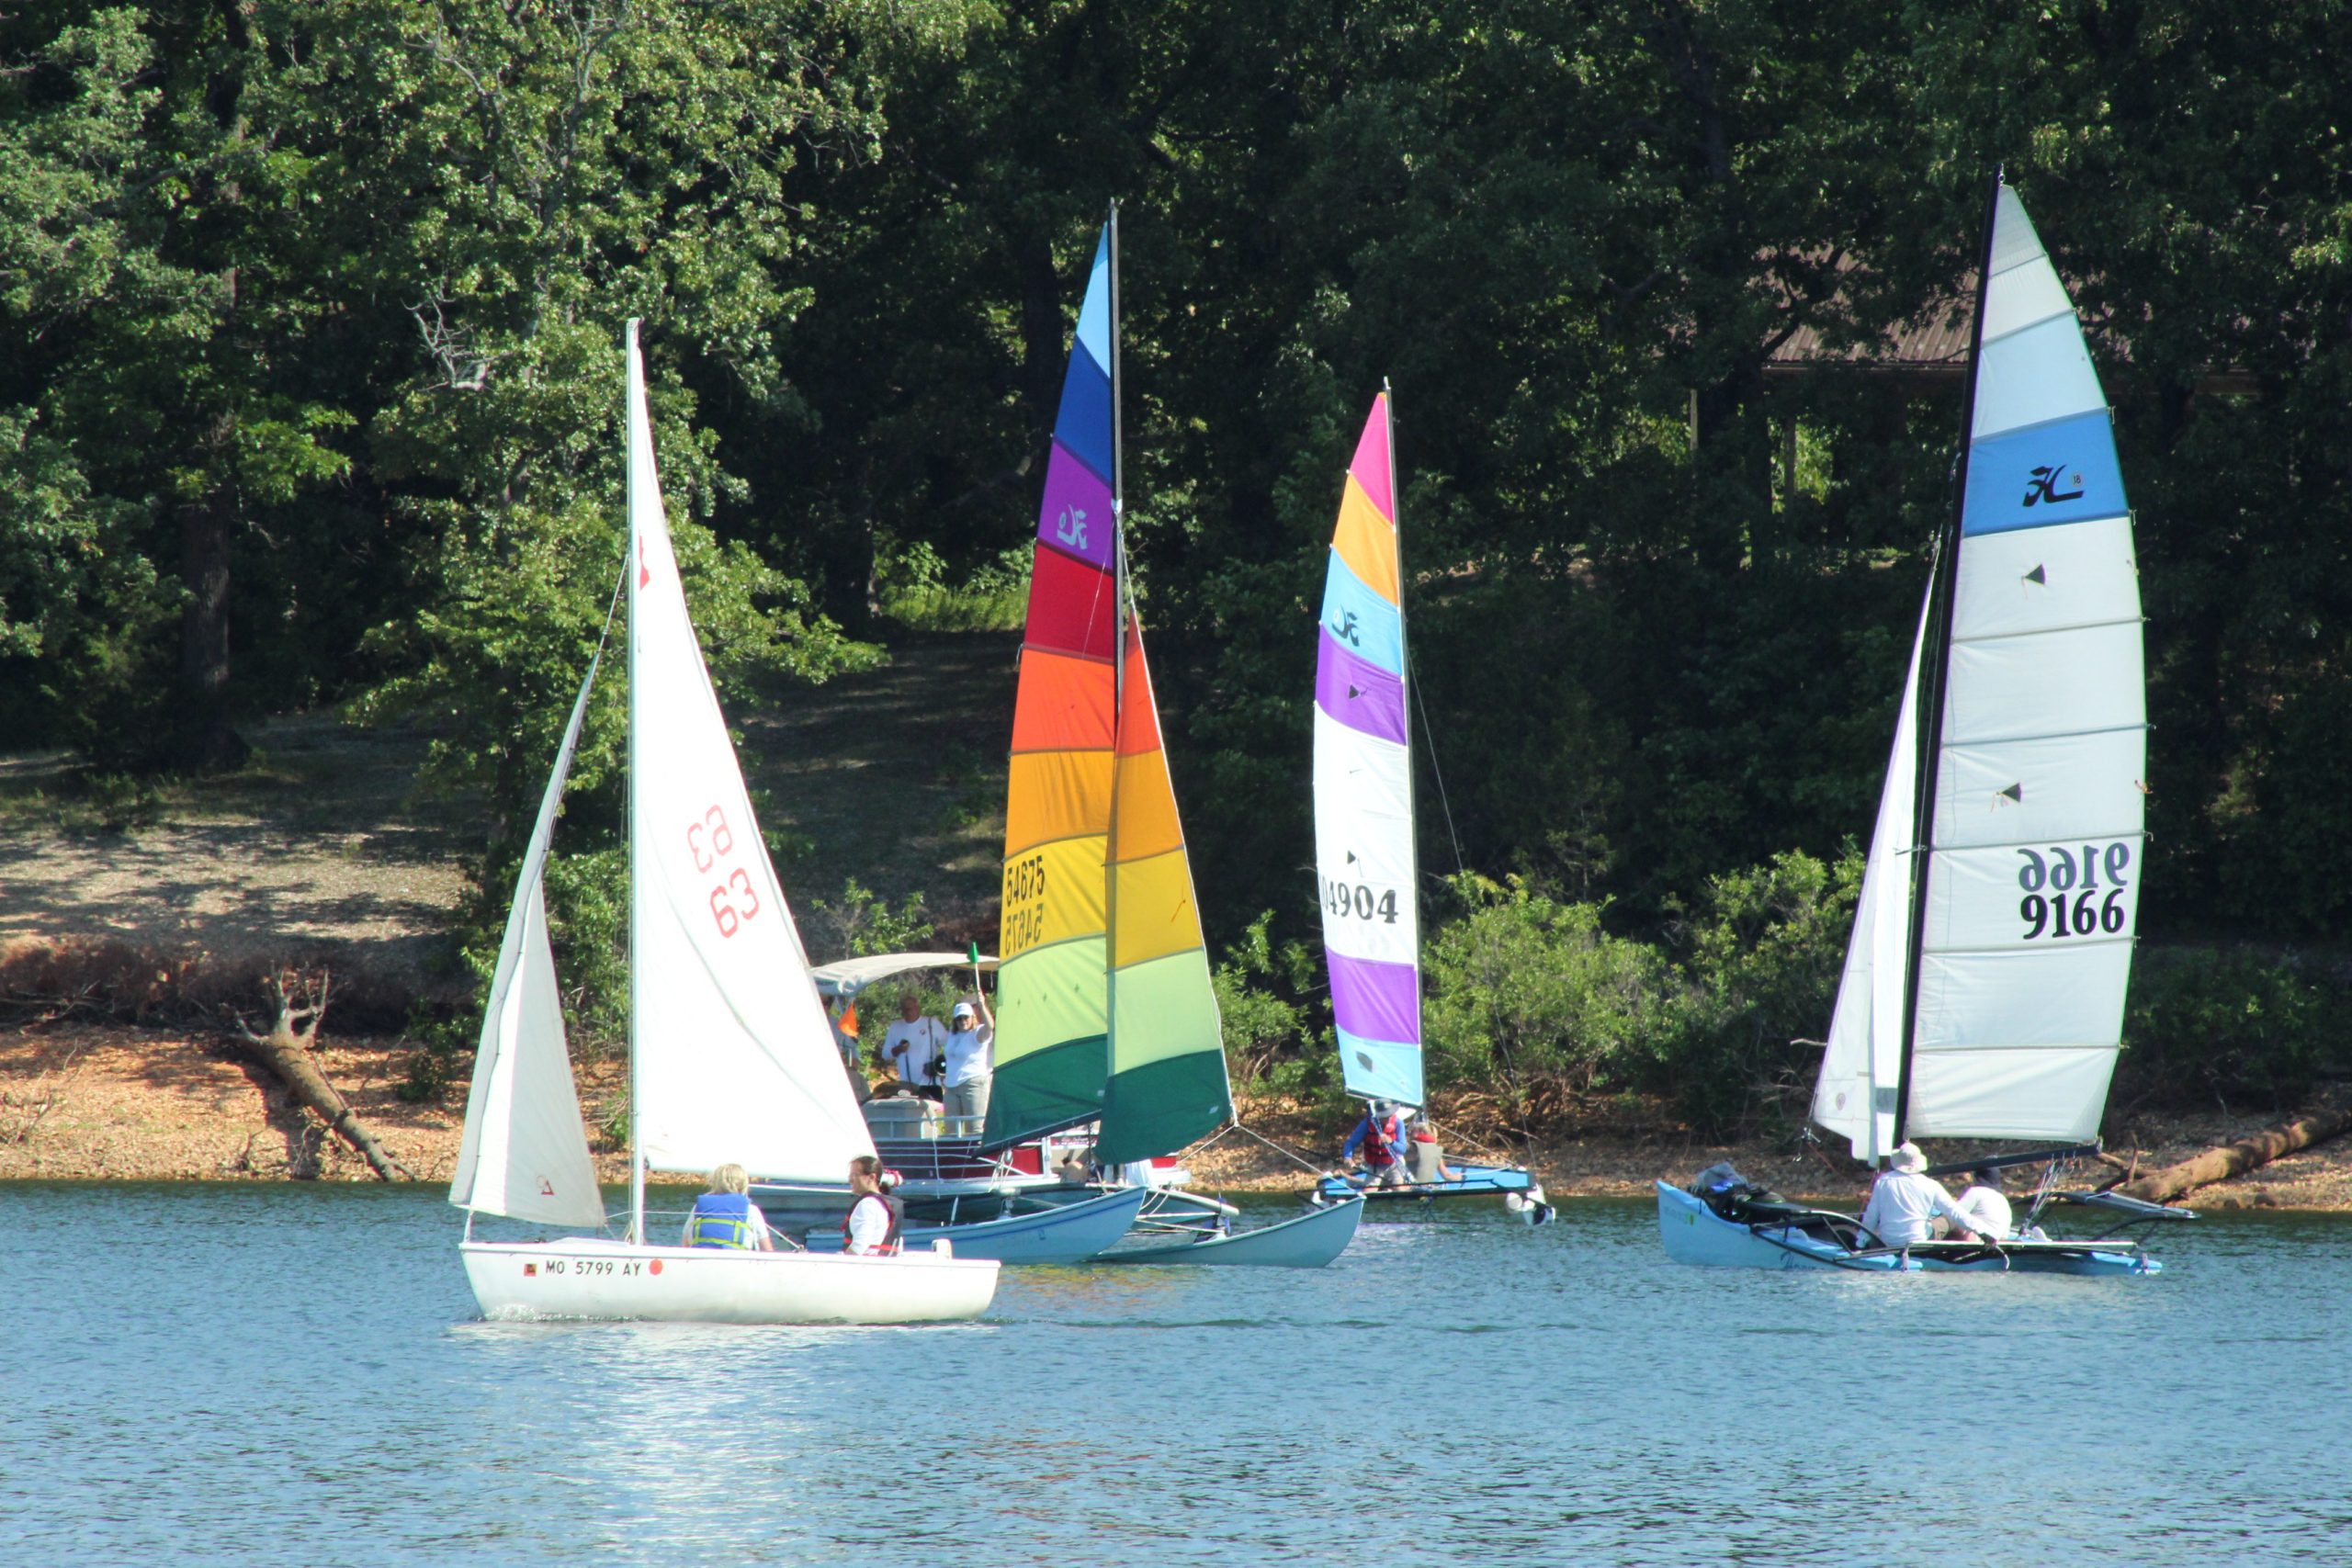 Women on the Water Regatta at Fellows Lake helps grow the sport of sailing